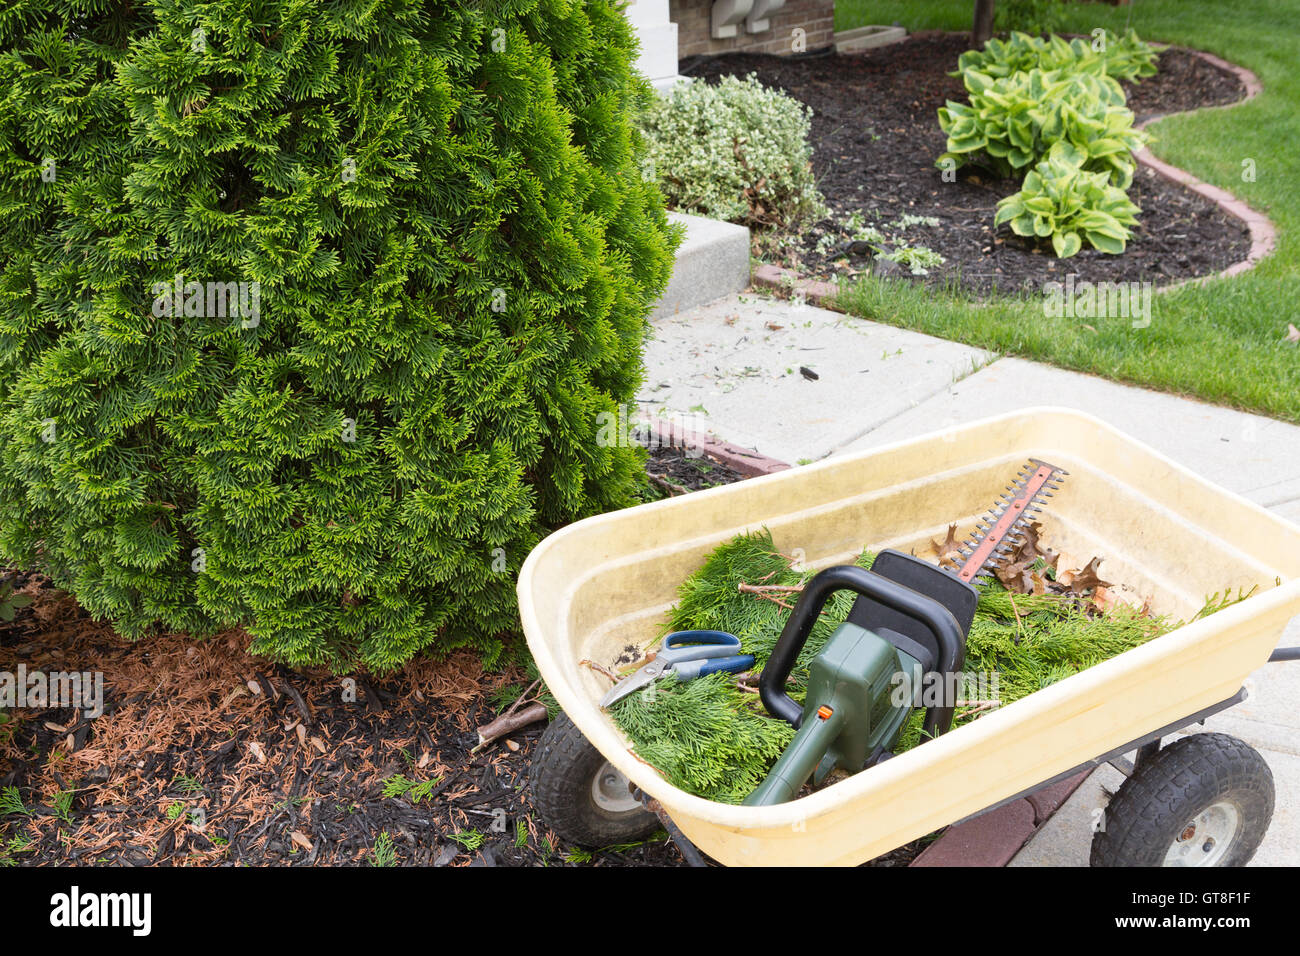 Using a hedge trimmer to trim Arborvitaes or evergreen Thuja trees around the house to maintain their ornamental tapering shape Stock Photo